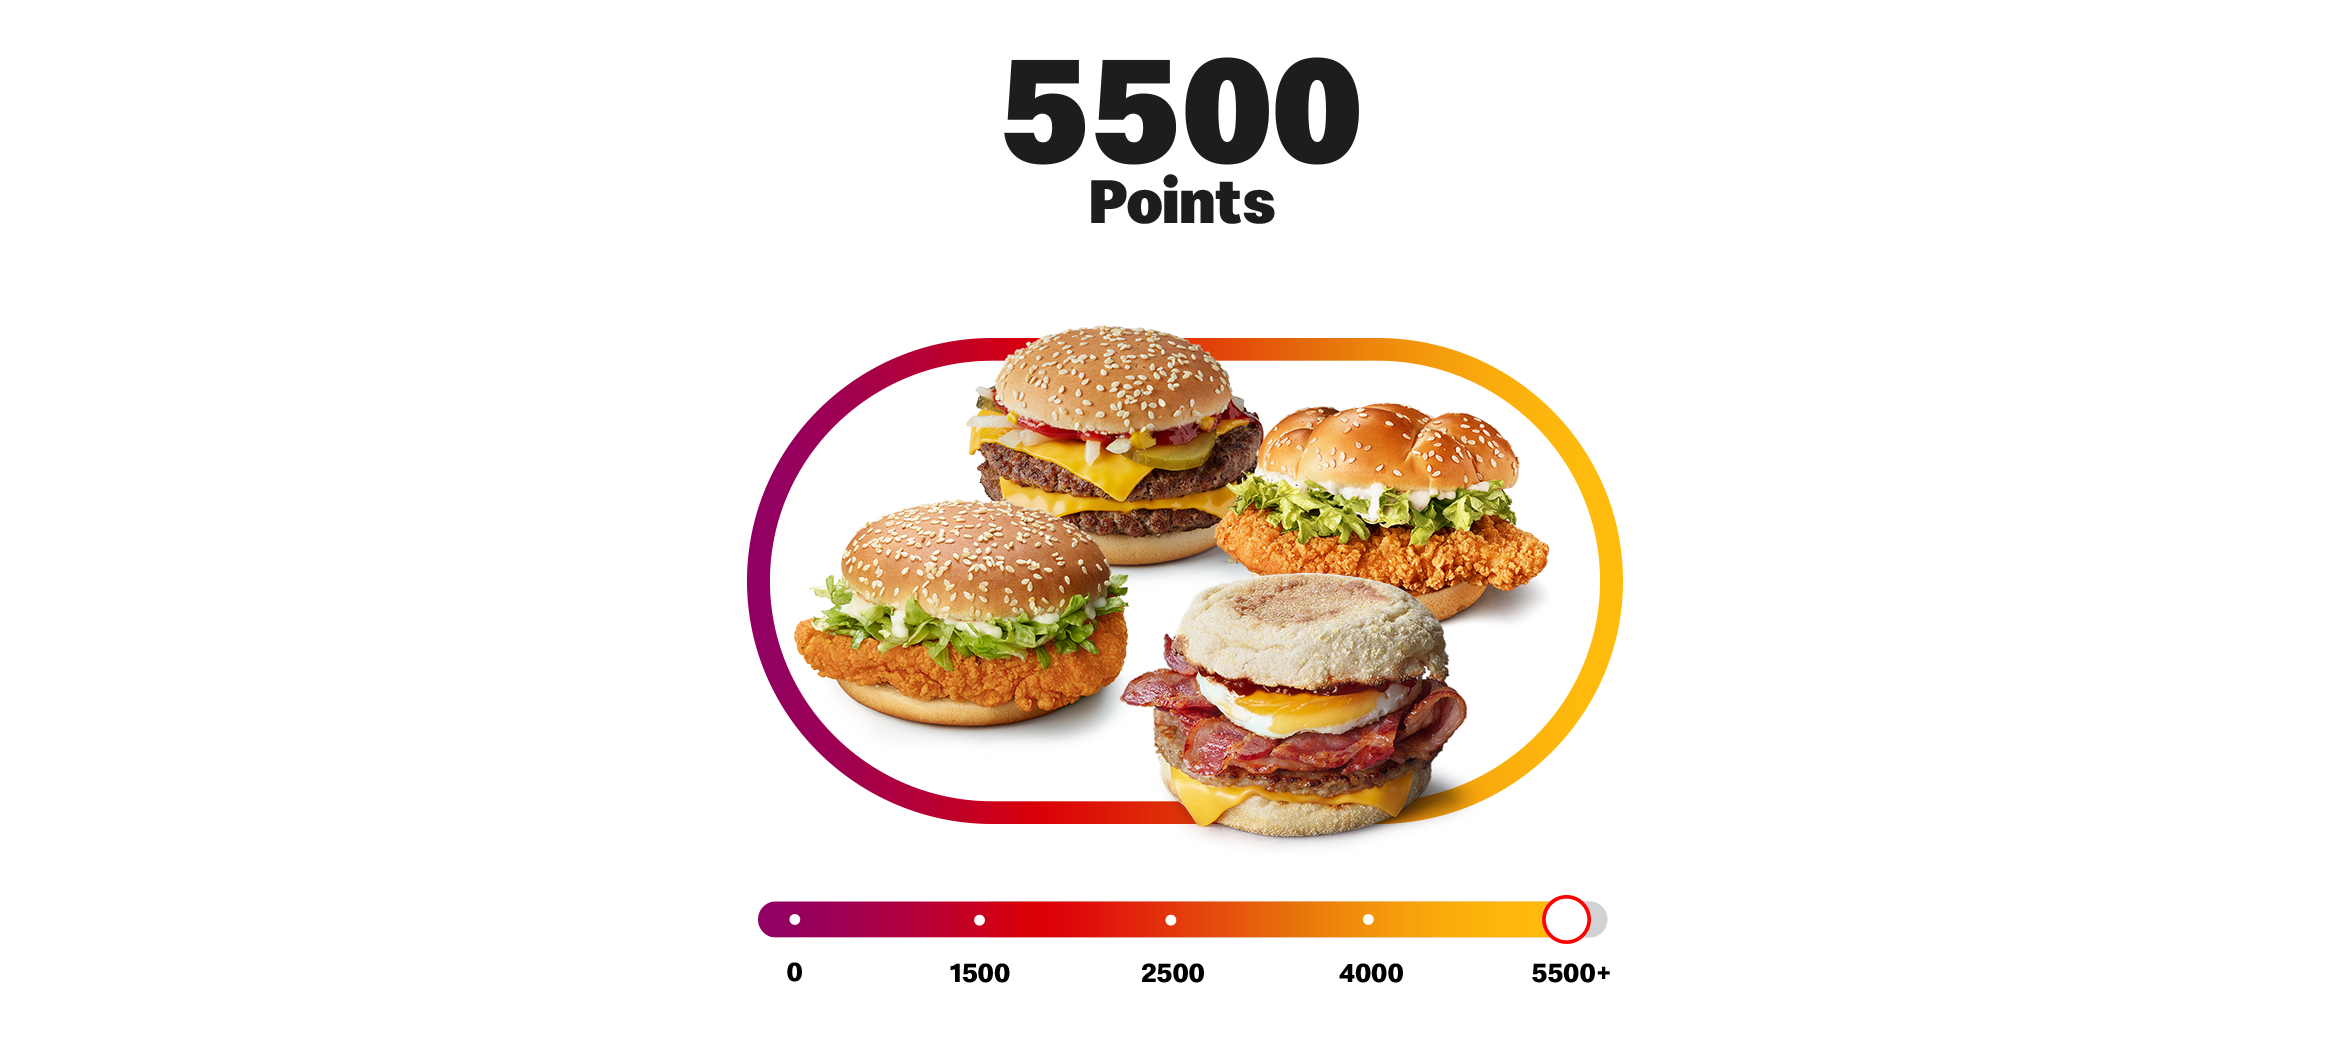 My McDonald’s Rewards points bar with 5500 points with McSpicy®, Mighty McMuffin™, McCrispy or a Double Quarter Pounder with Cheese.